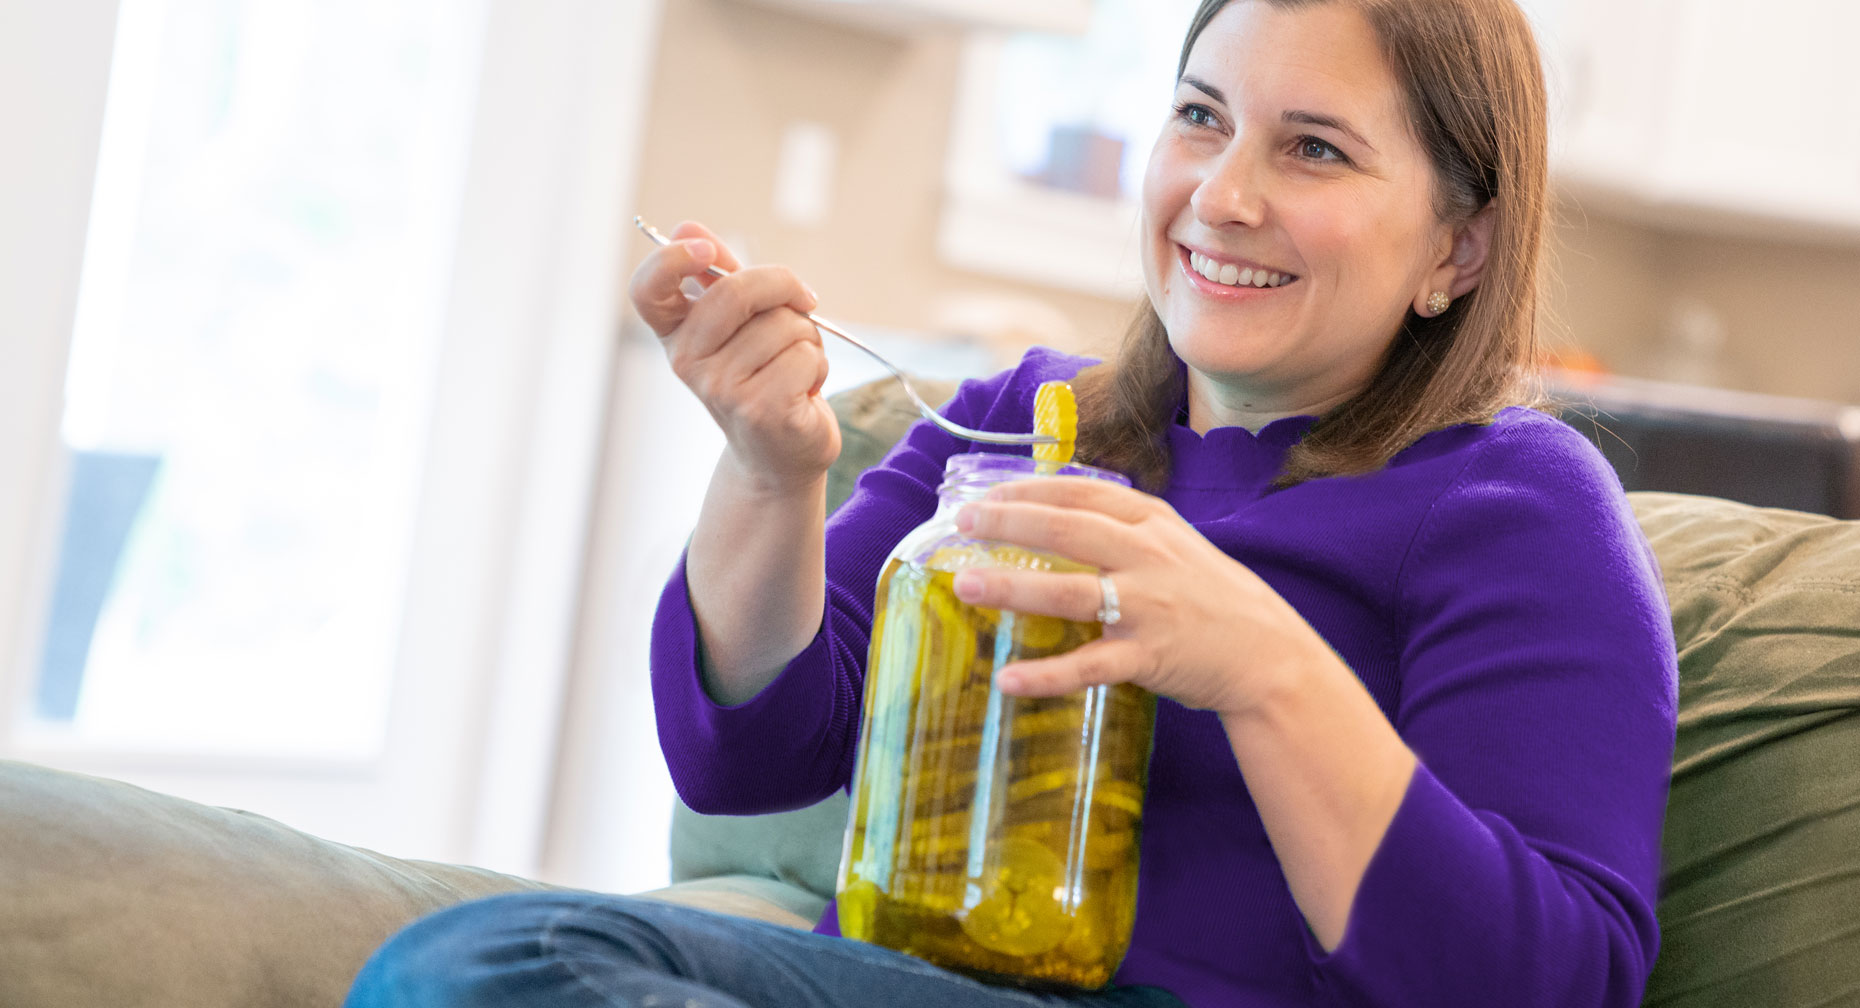 Woman with pregnancy food craving eating on couch